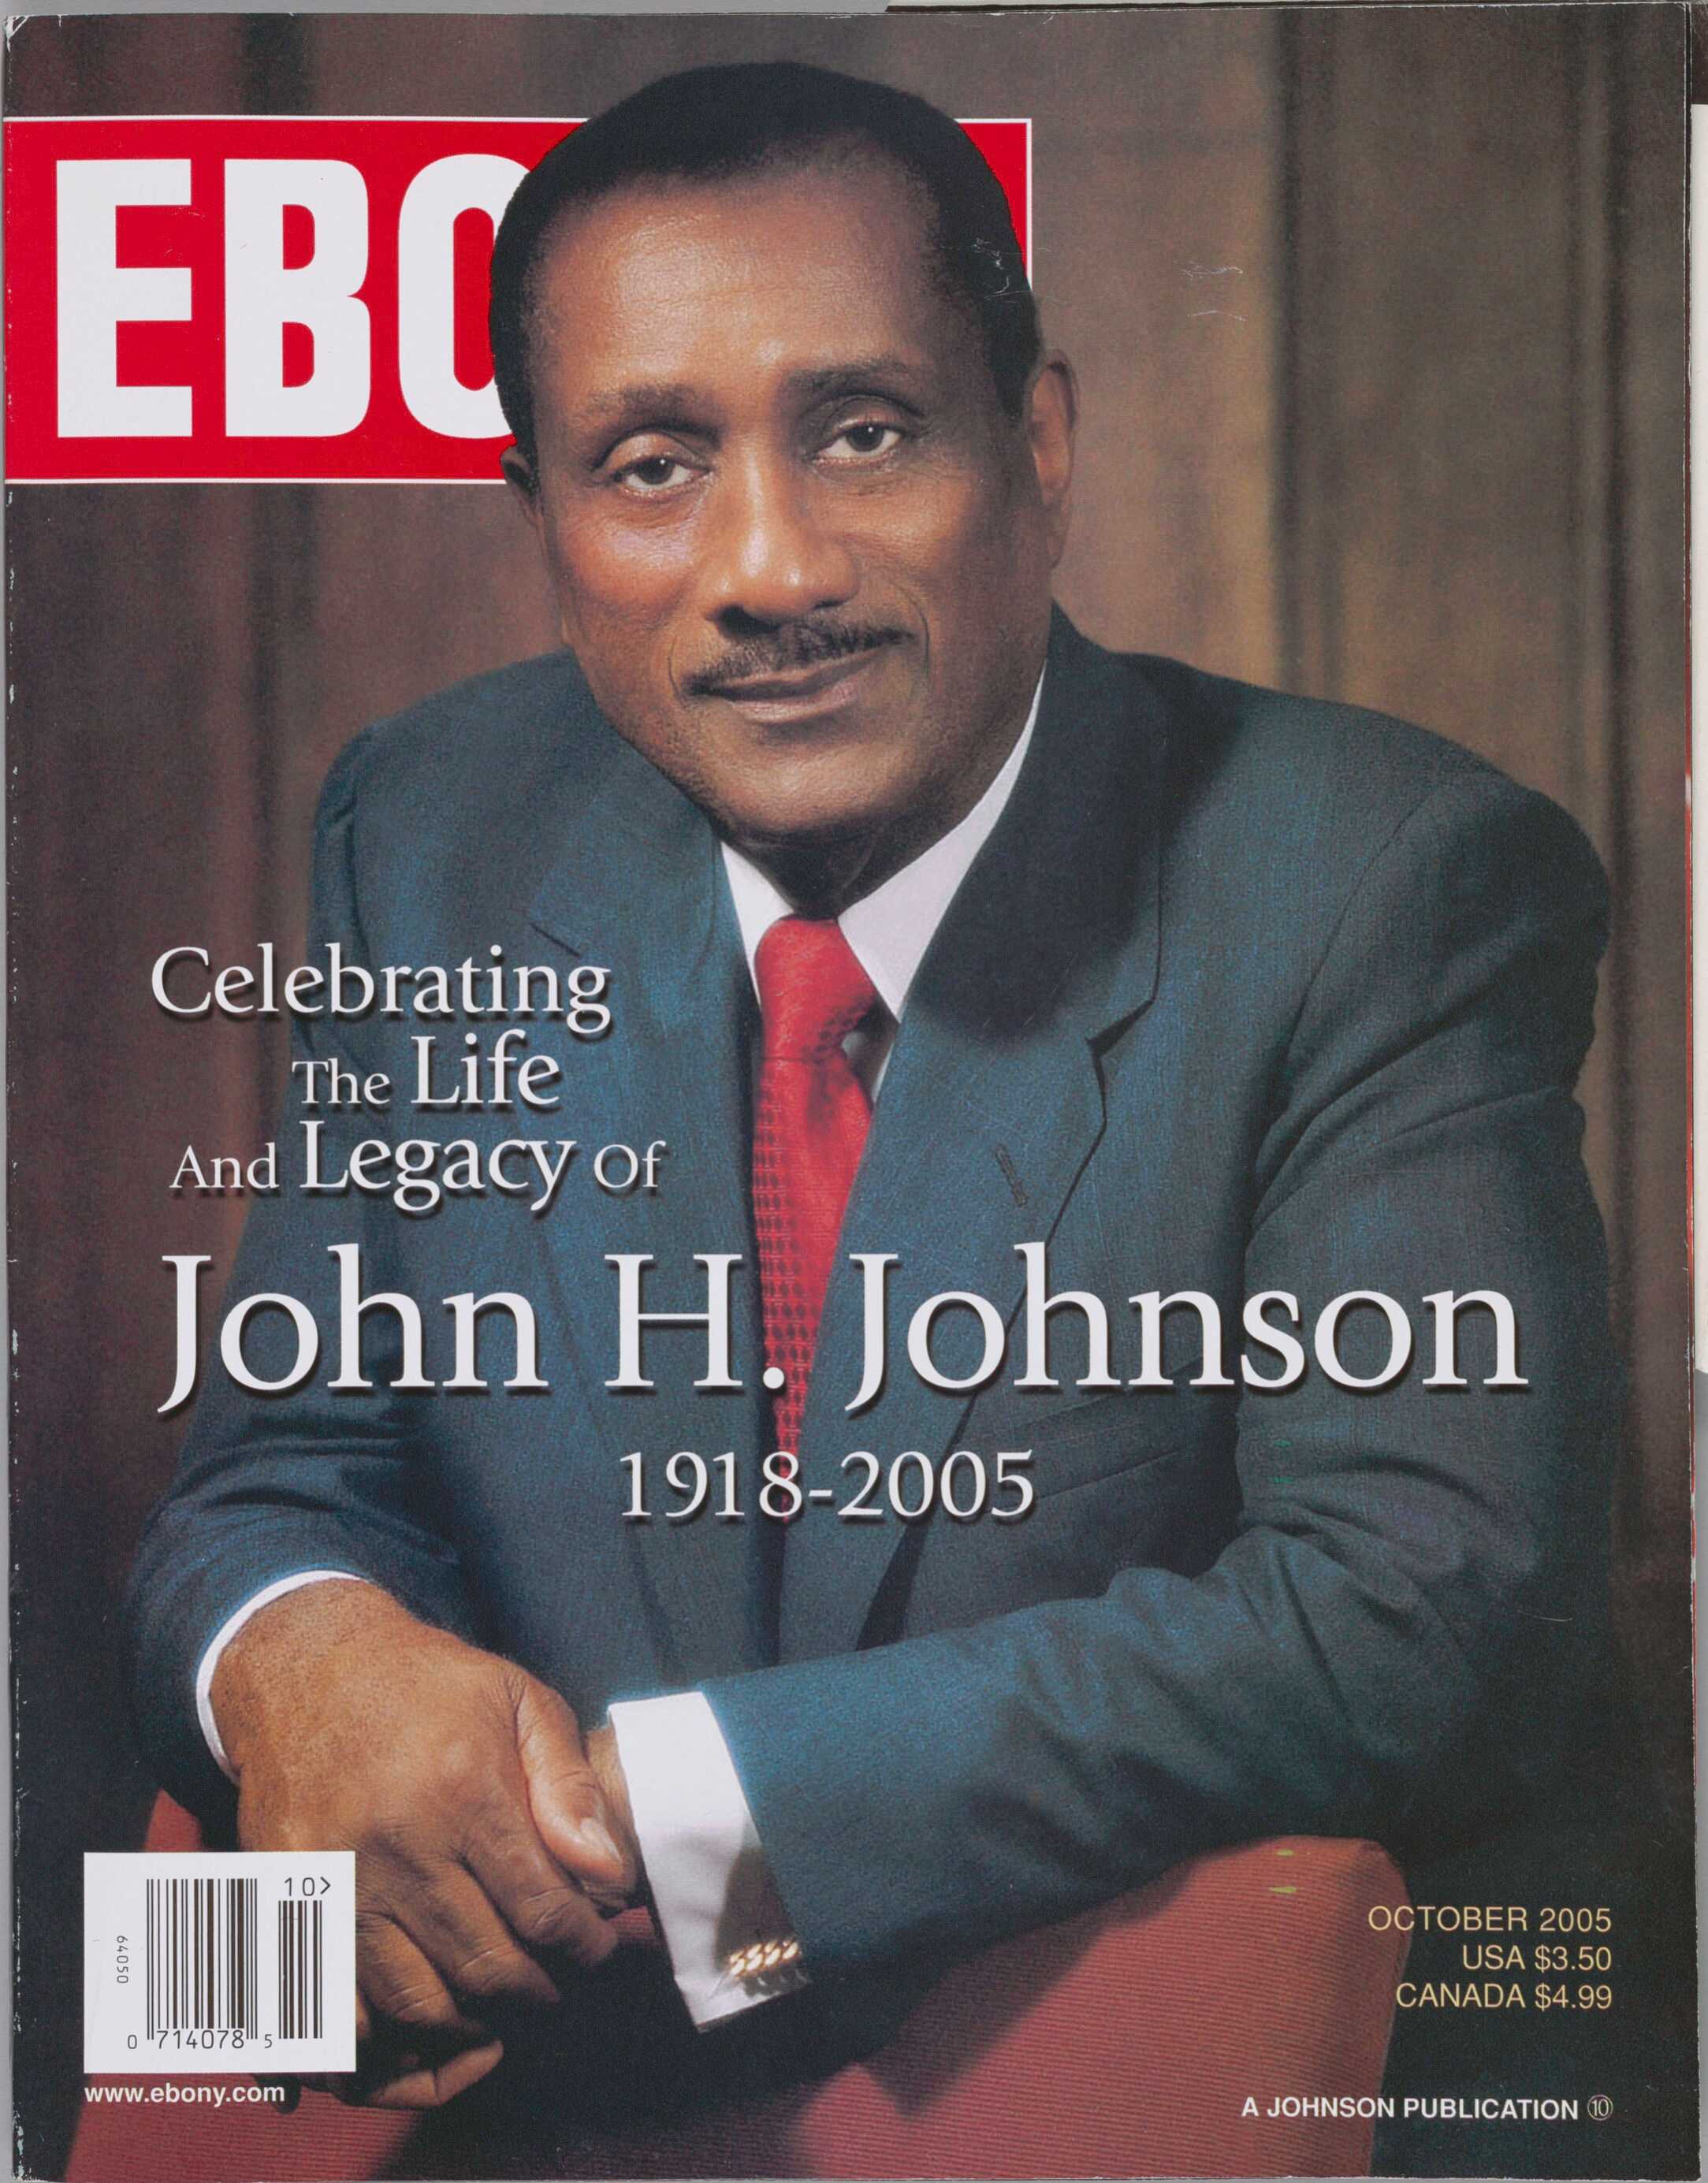 Ebony magazine, Volume LX, Number 12. This edition honors the life of John H. Johnson, the founder of Johnson Publishing Company, publisher of Ebony magazine.